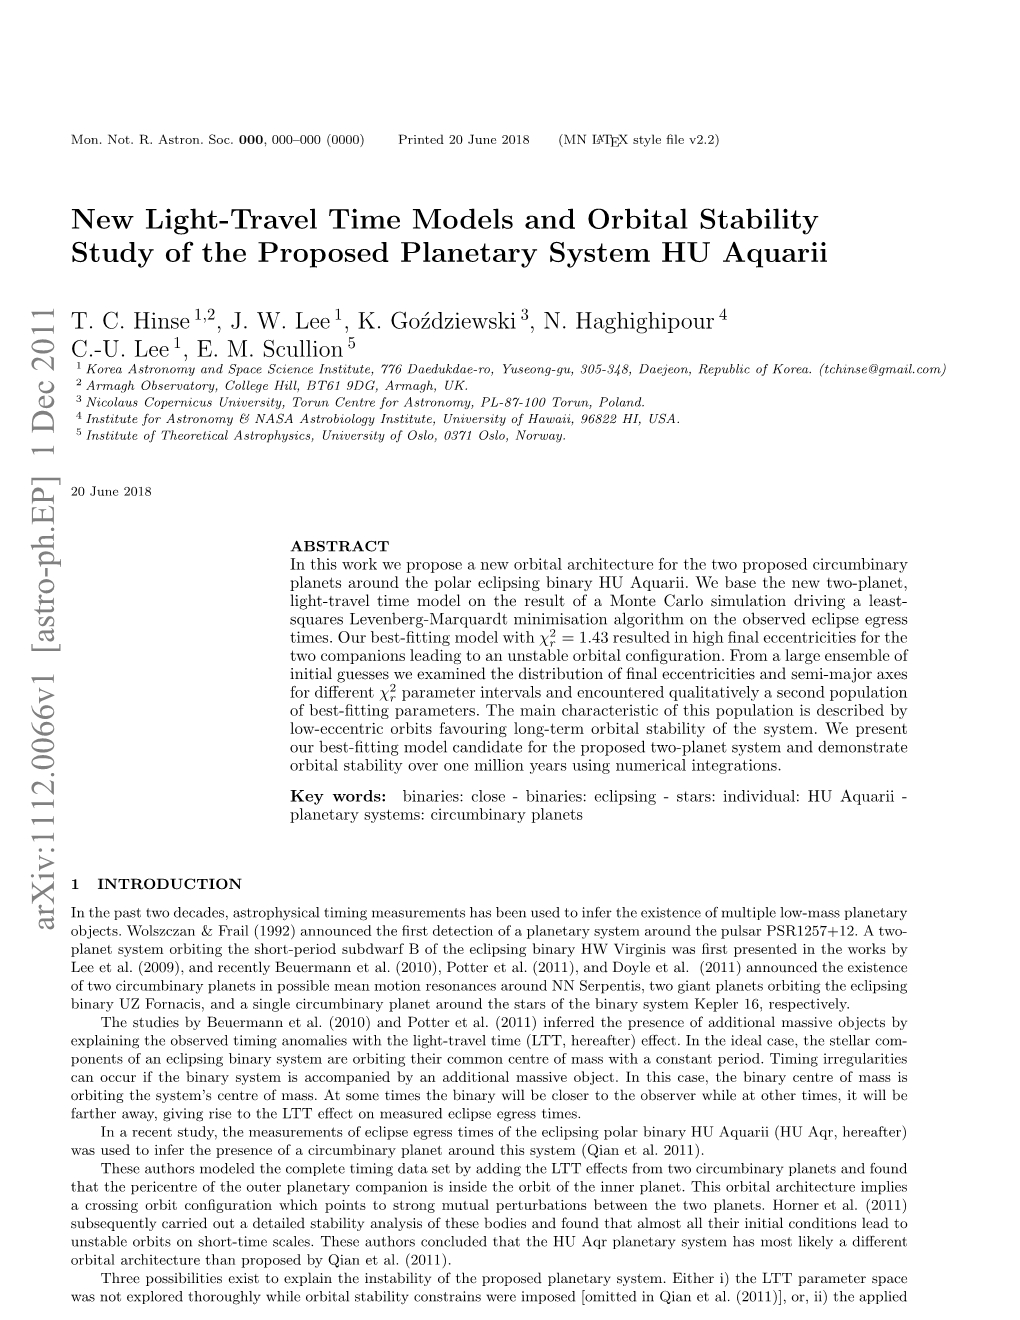 New Light-Travel Time Models and Orbital Stability Study of The